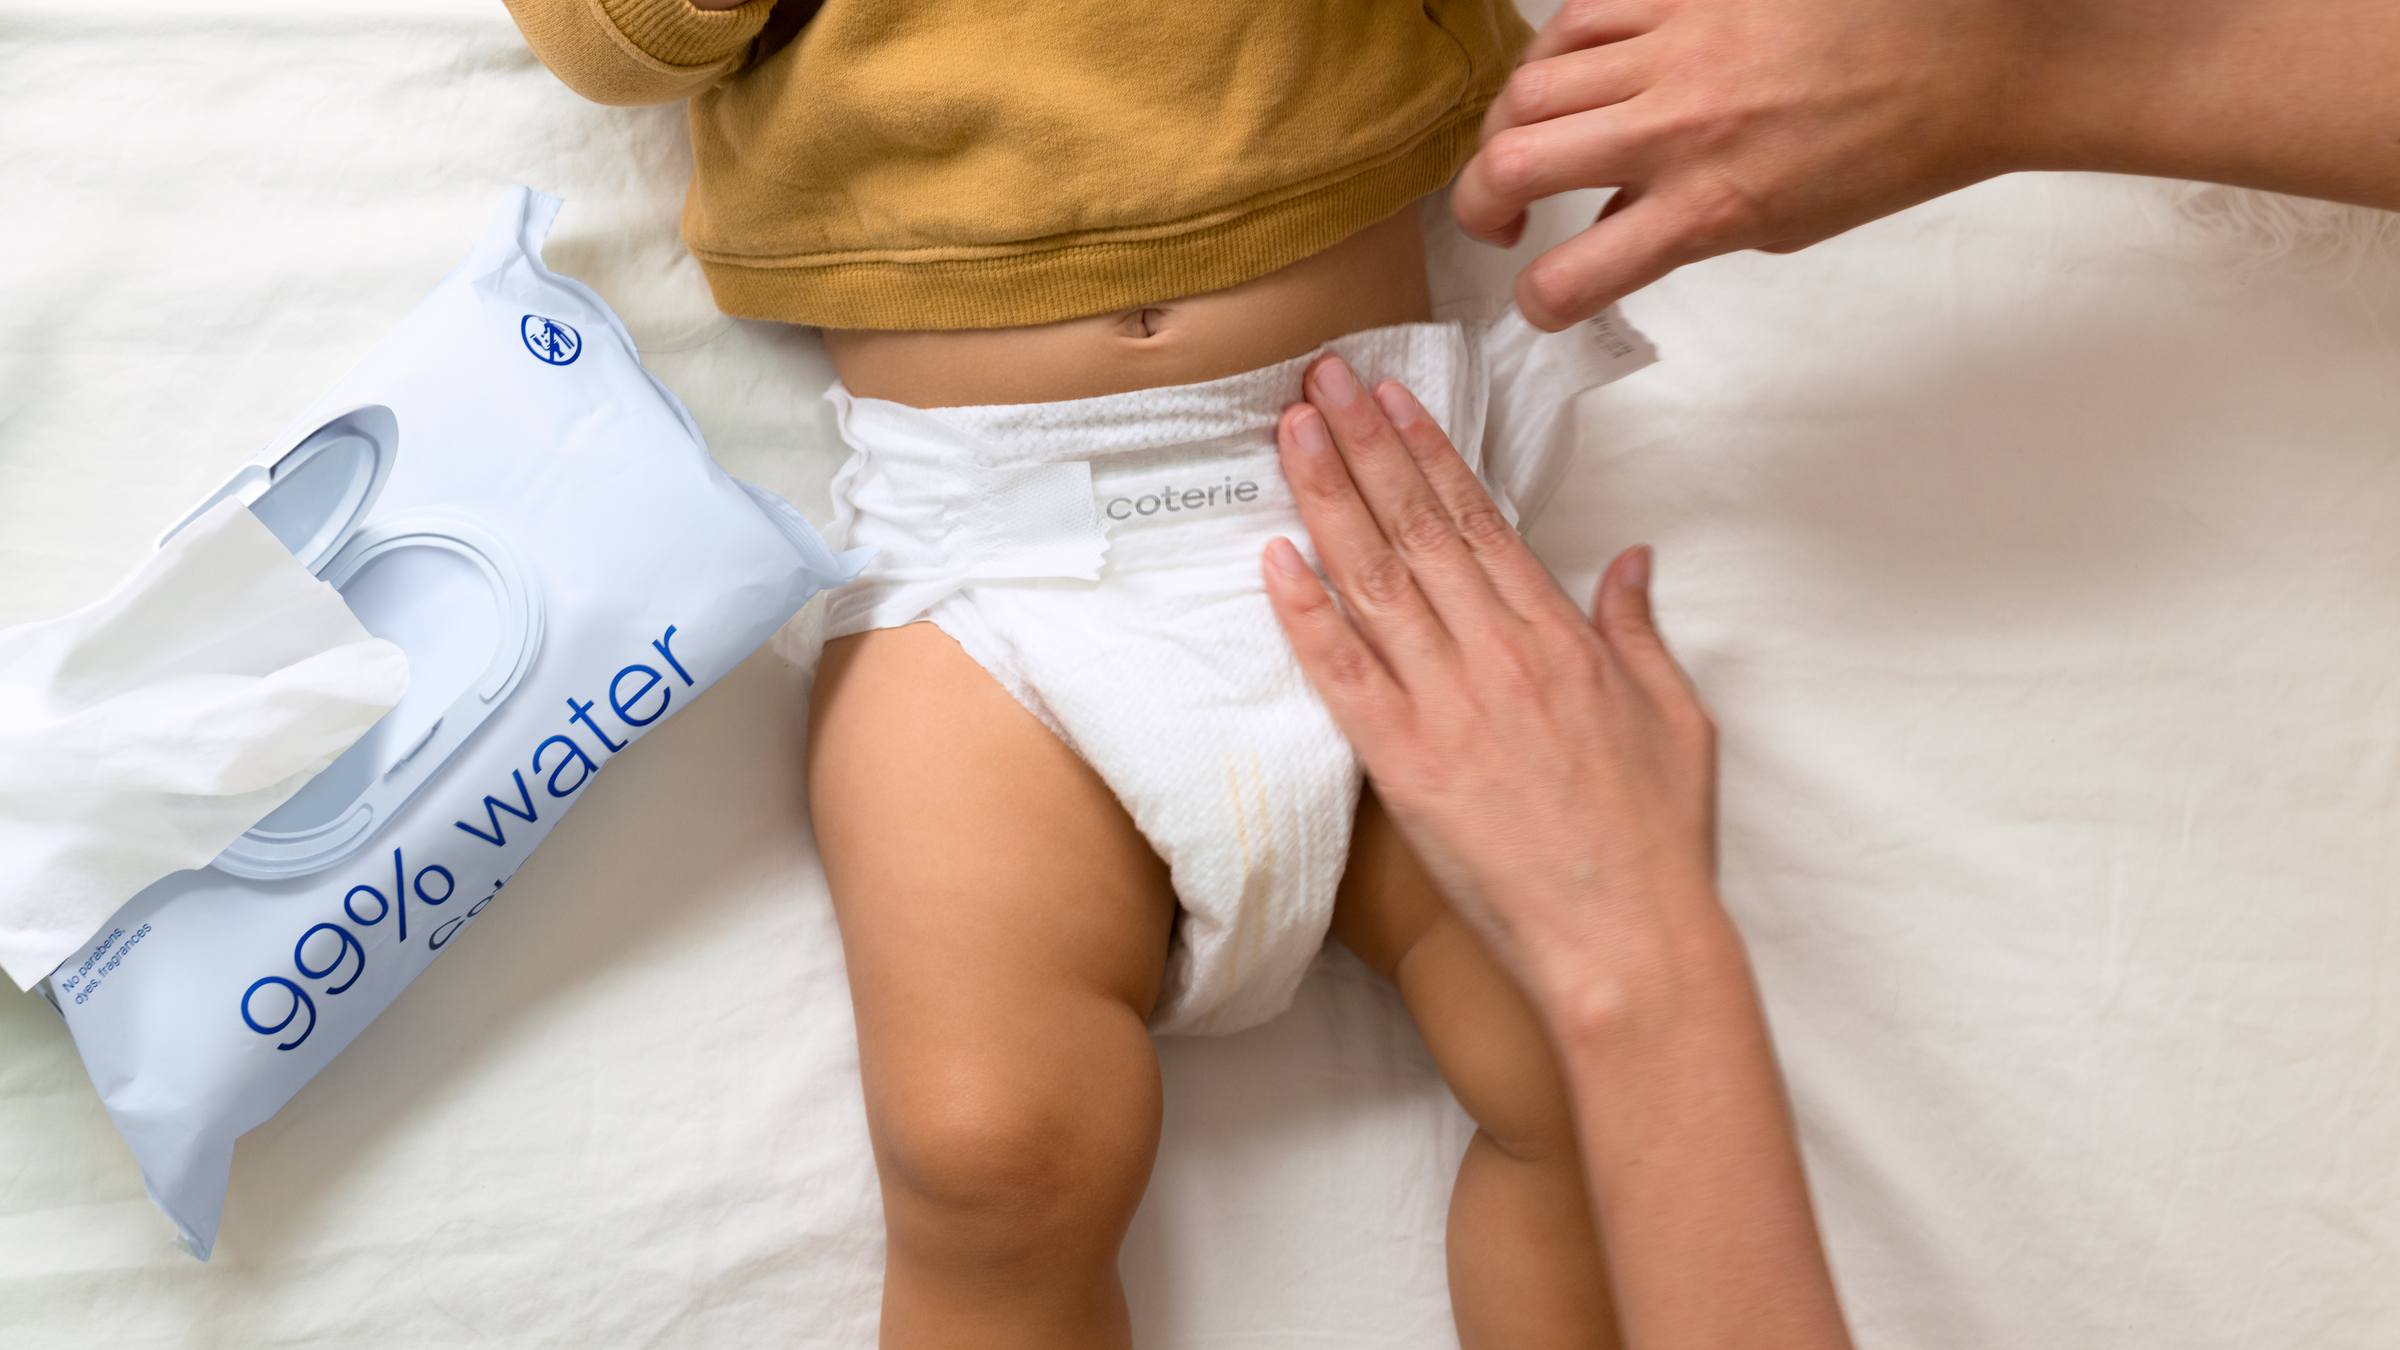 Changing a Coterie Diaper